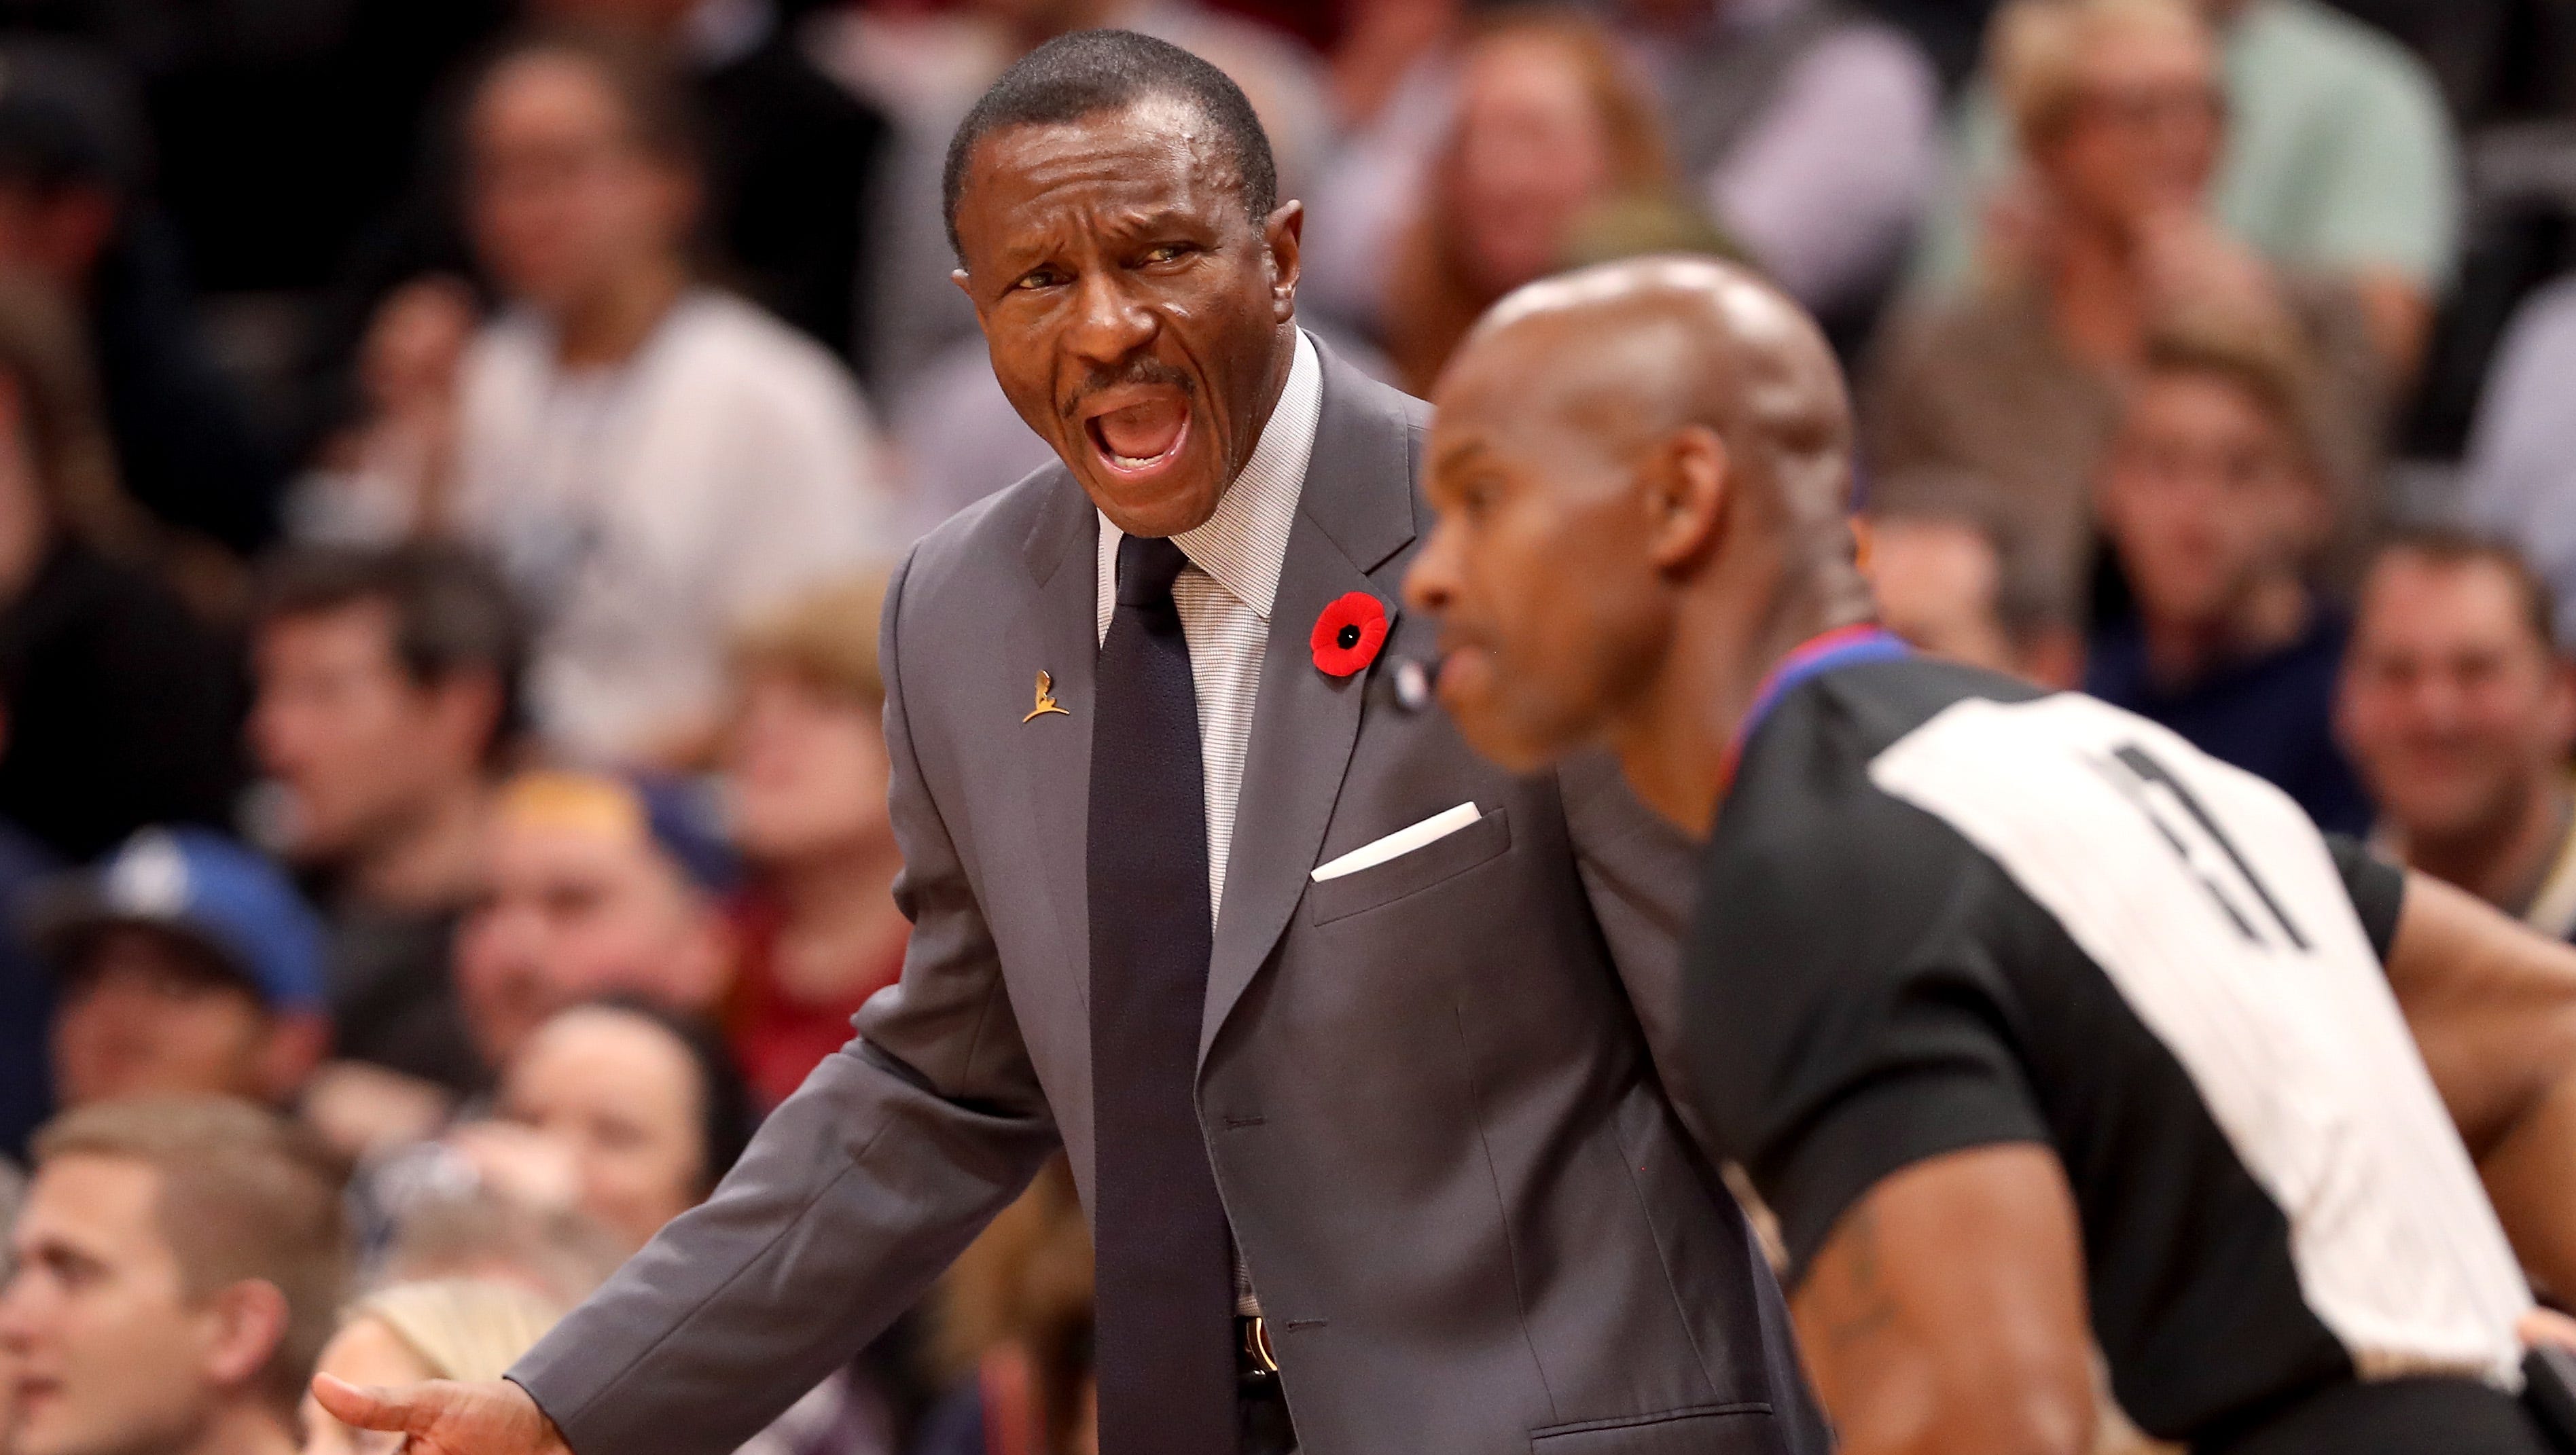 Head coach Dwane Casey of the Toronto Raptors shouts instructions to his team as they play the Denver Nuggets at the Pepsi Center on November 1, 2017 in Denver, Colorado.